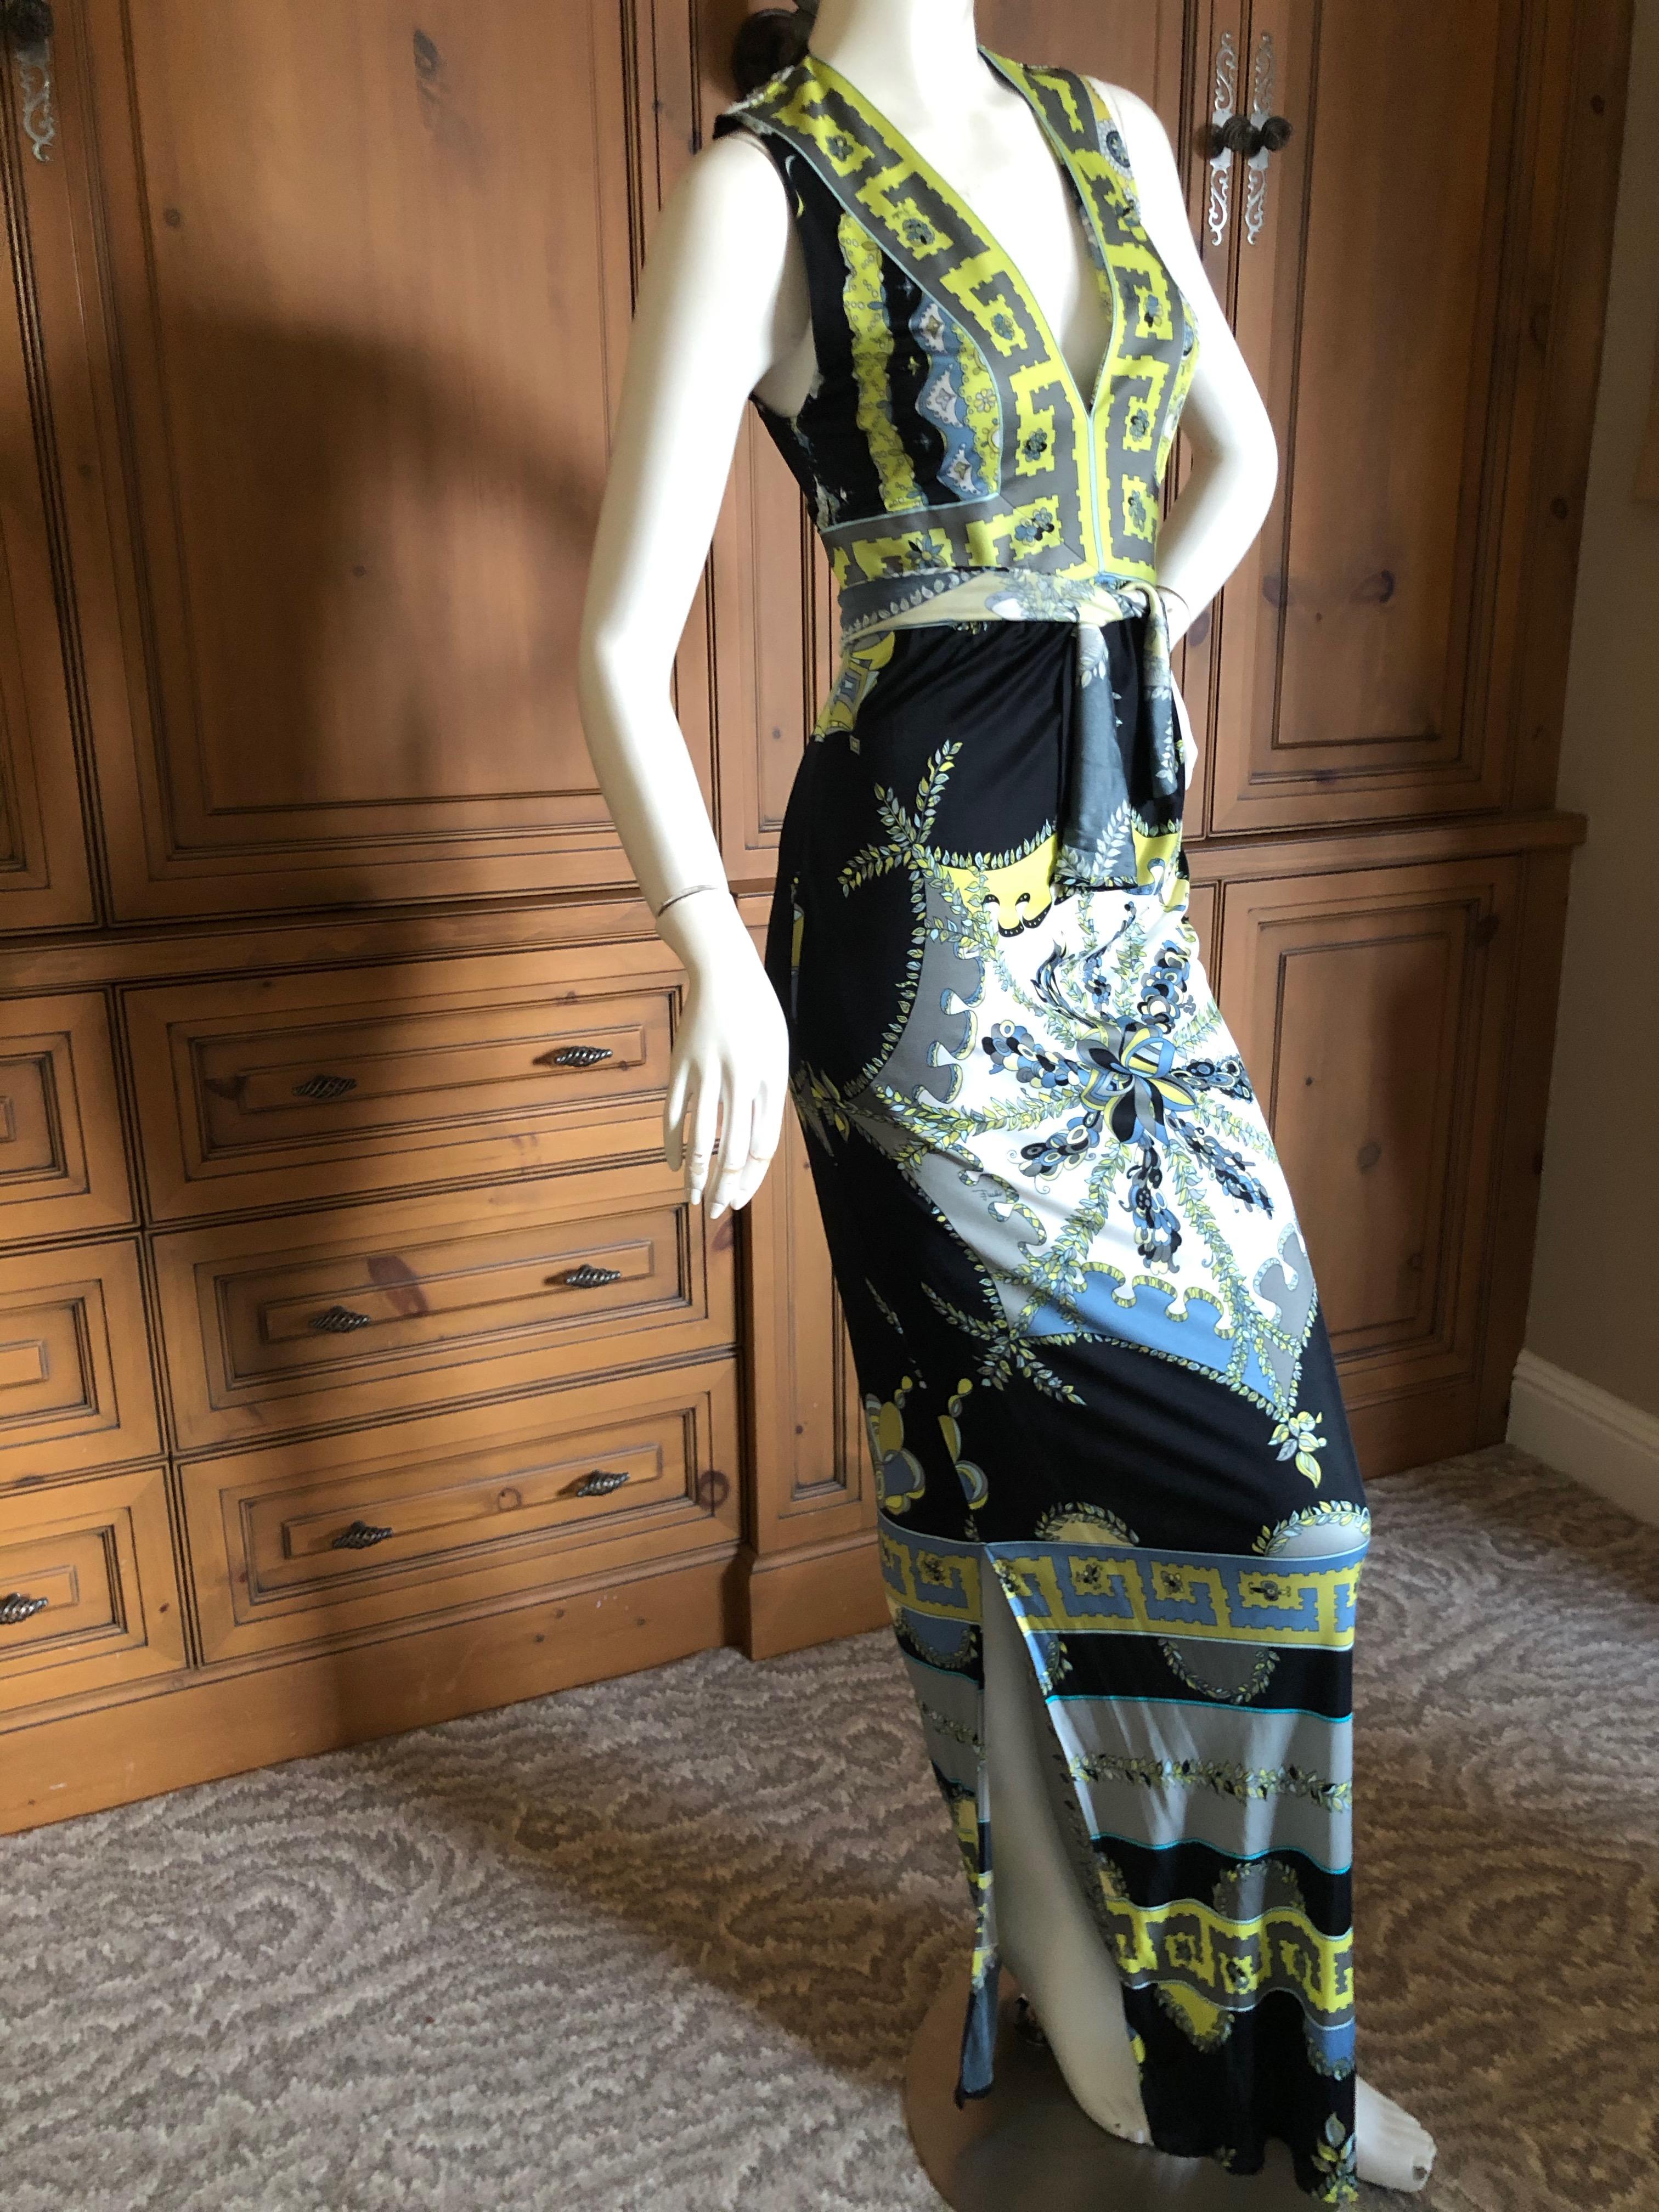 Emilio Pucci Bead Embellished Maxi Dress.
This is so much prettier in person, the embellishments didn't photograph well.
Size 4
Bust 35